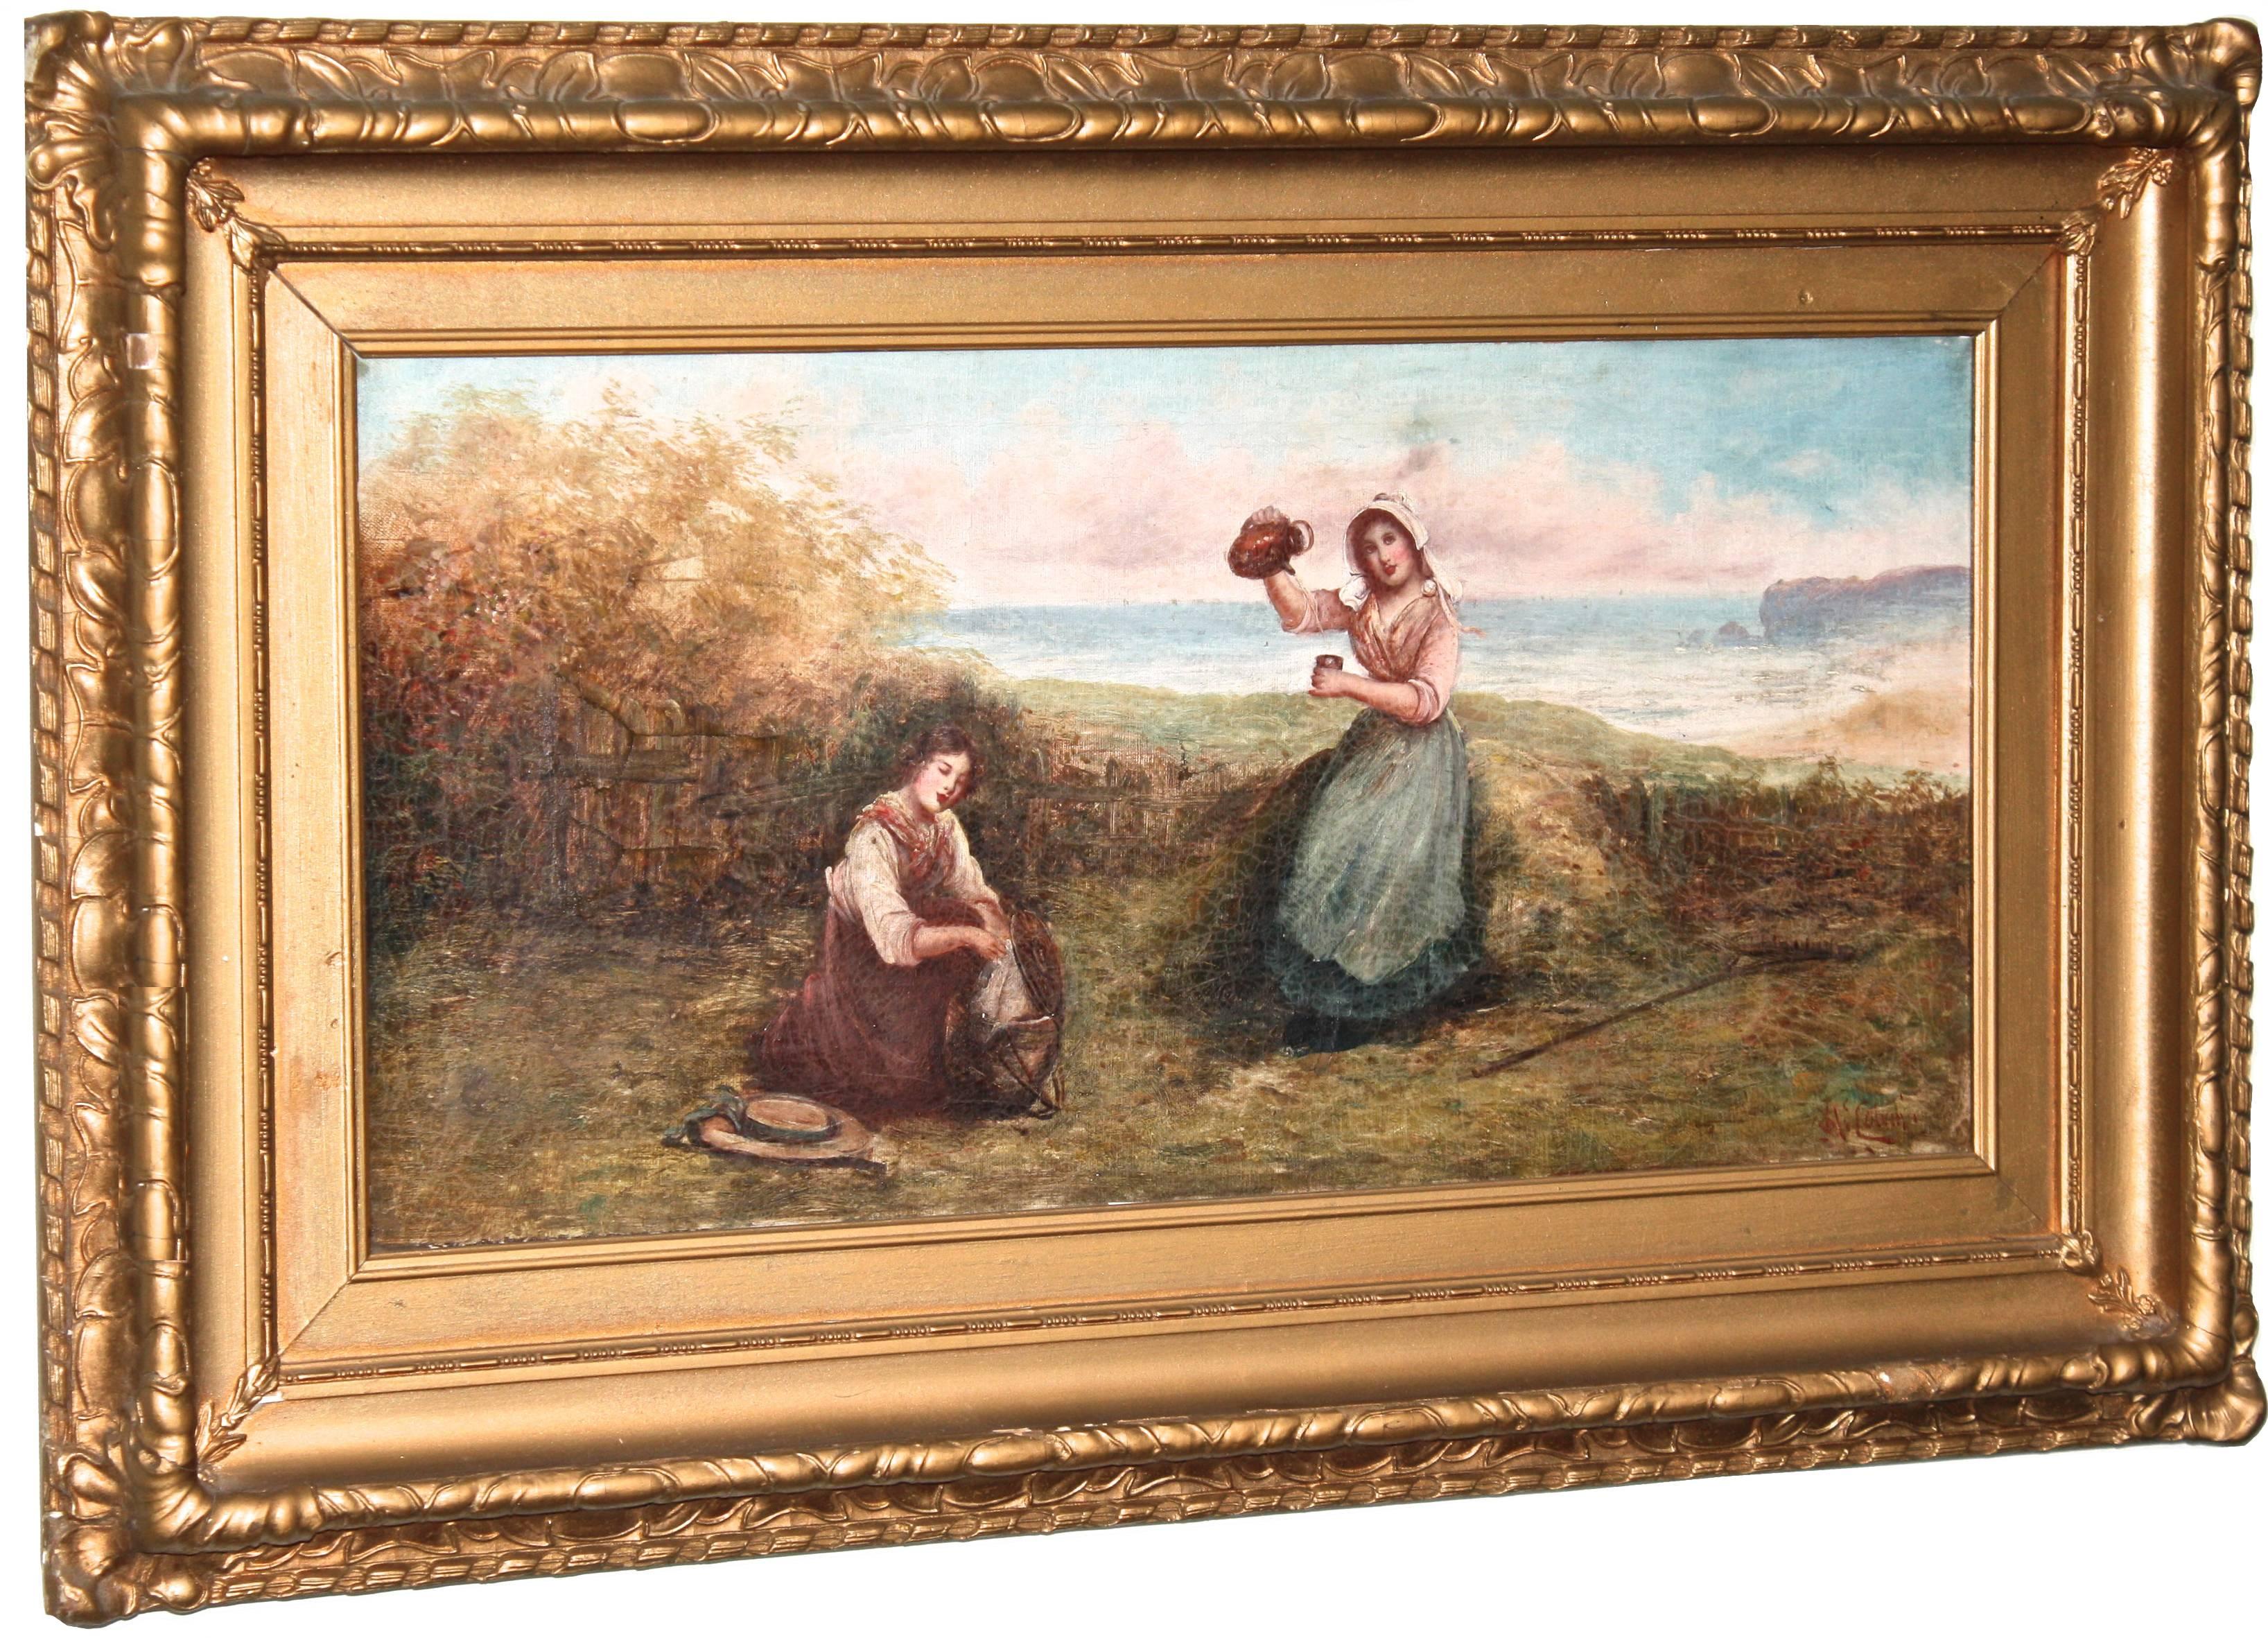 A bucolic oil painting of two maidens picnicking at a seaside cove. British painter John Andrew McColvin 1864-1920, was born in Winlaton, Durham. In the 1881 Census, he was living in Newcastle and was an apprentice jeweler. By 1891 was living in